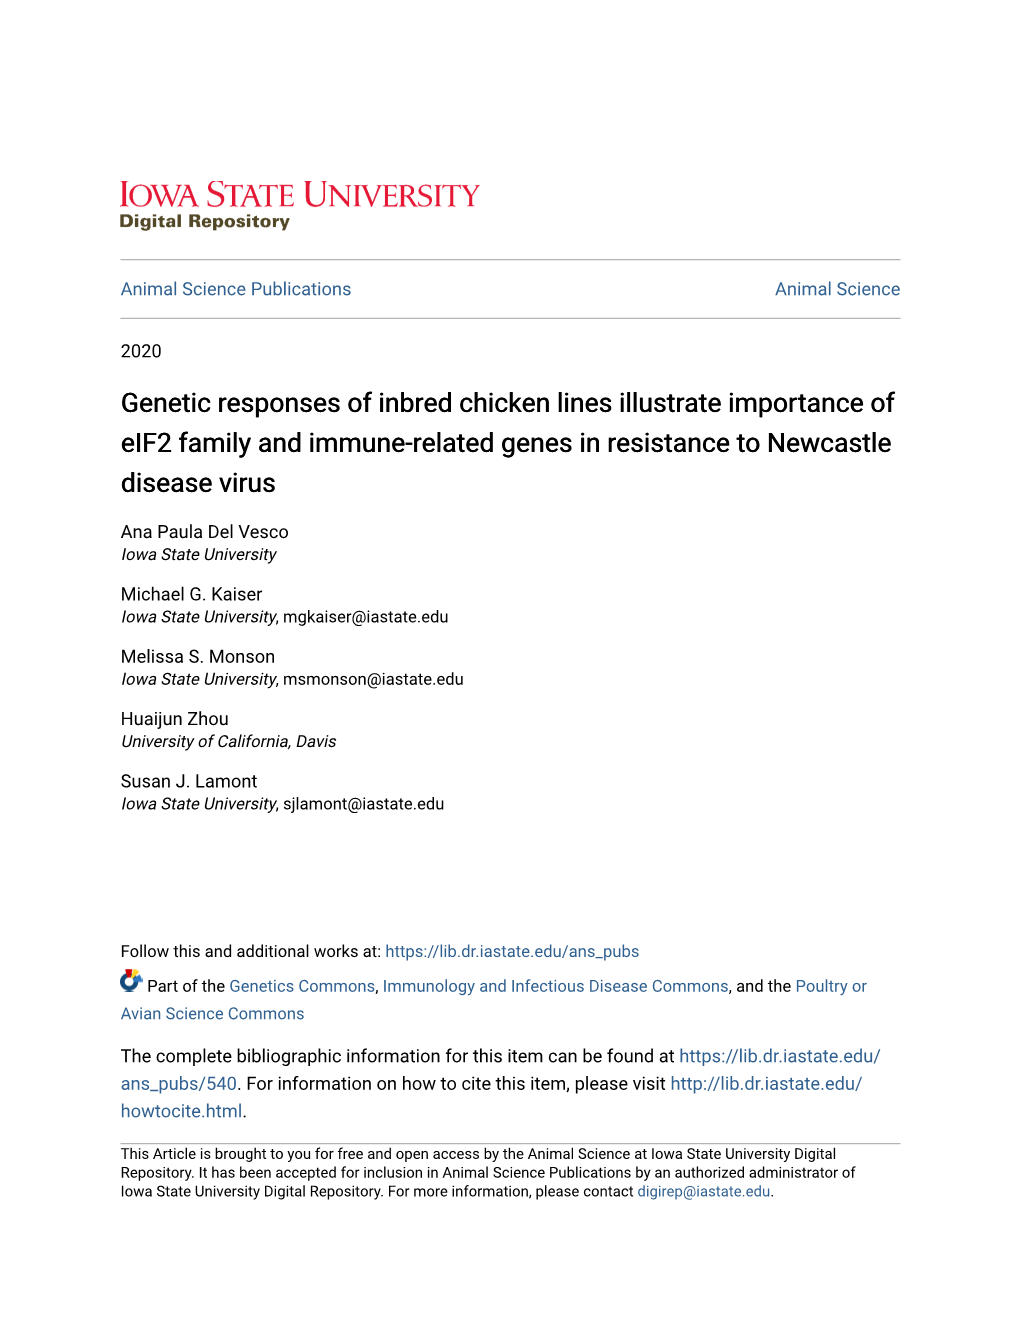 Genetic Responses of Inbred Chicken Lines Illustrate Importance of Eif2 Family and Immune-Related Genes in Resistance to Newcastle Disease Virus